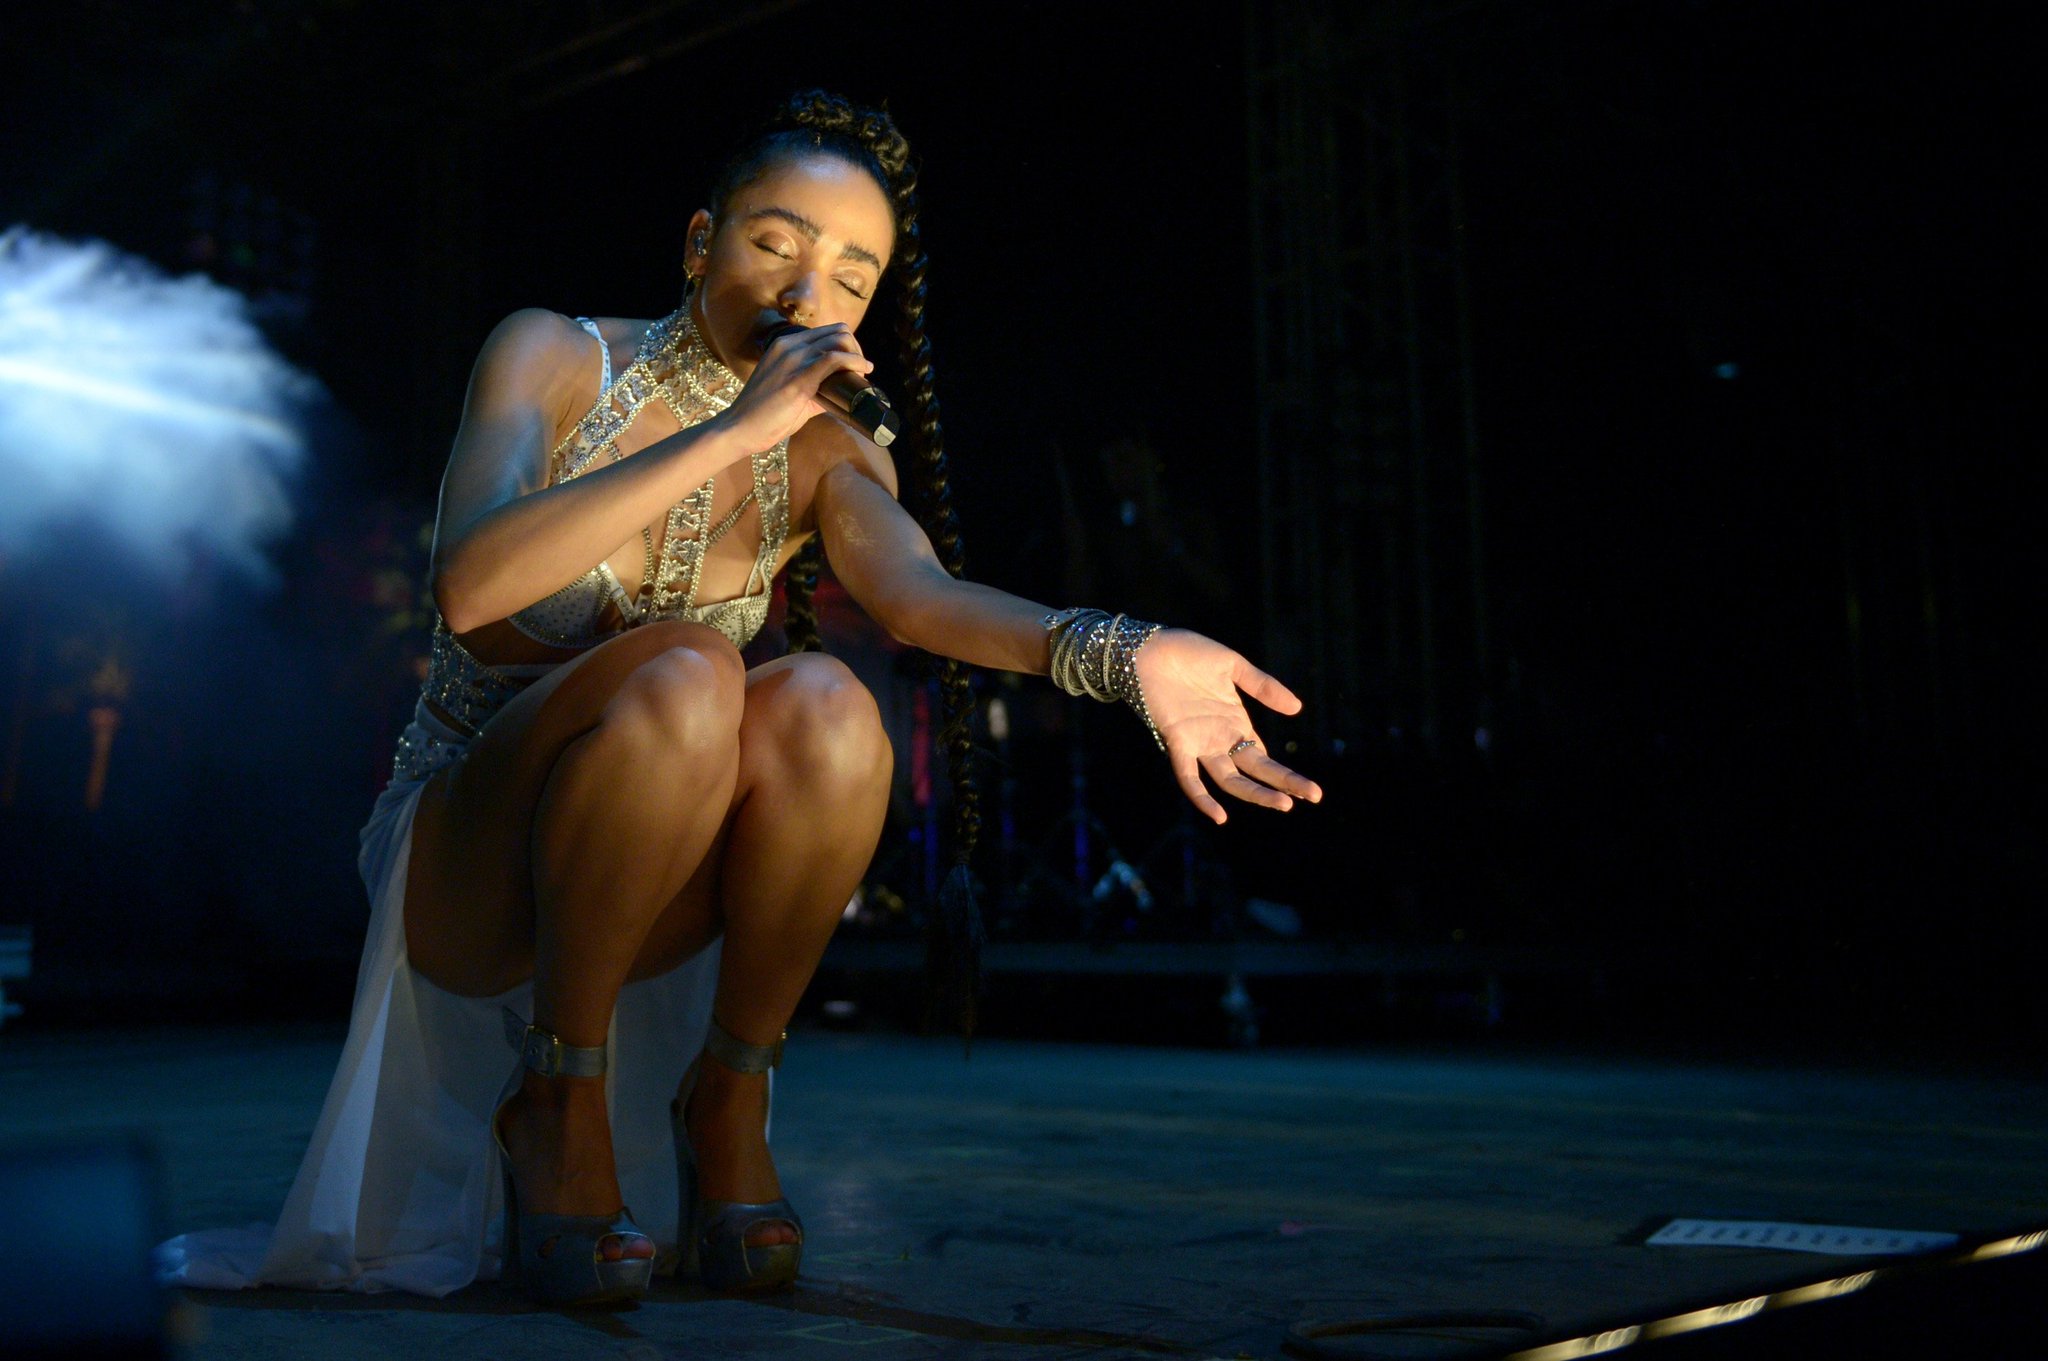 “.@FKAtwigs reveals that she is recovering after having 6 tumors removed in...